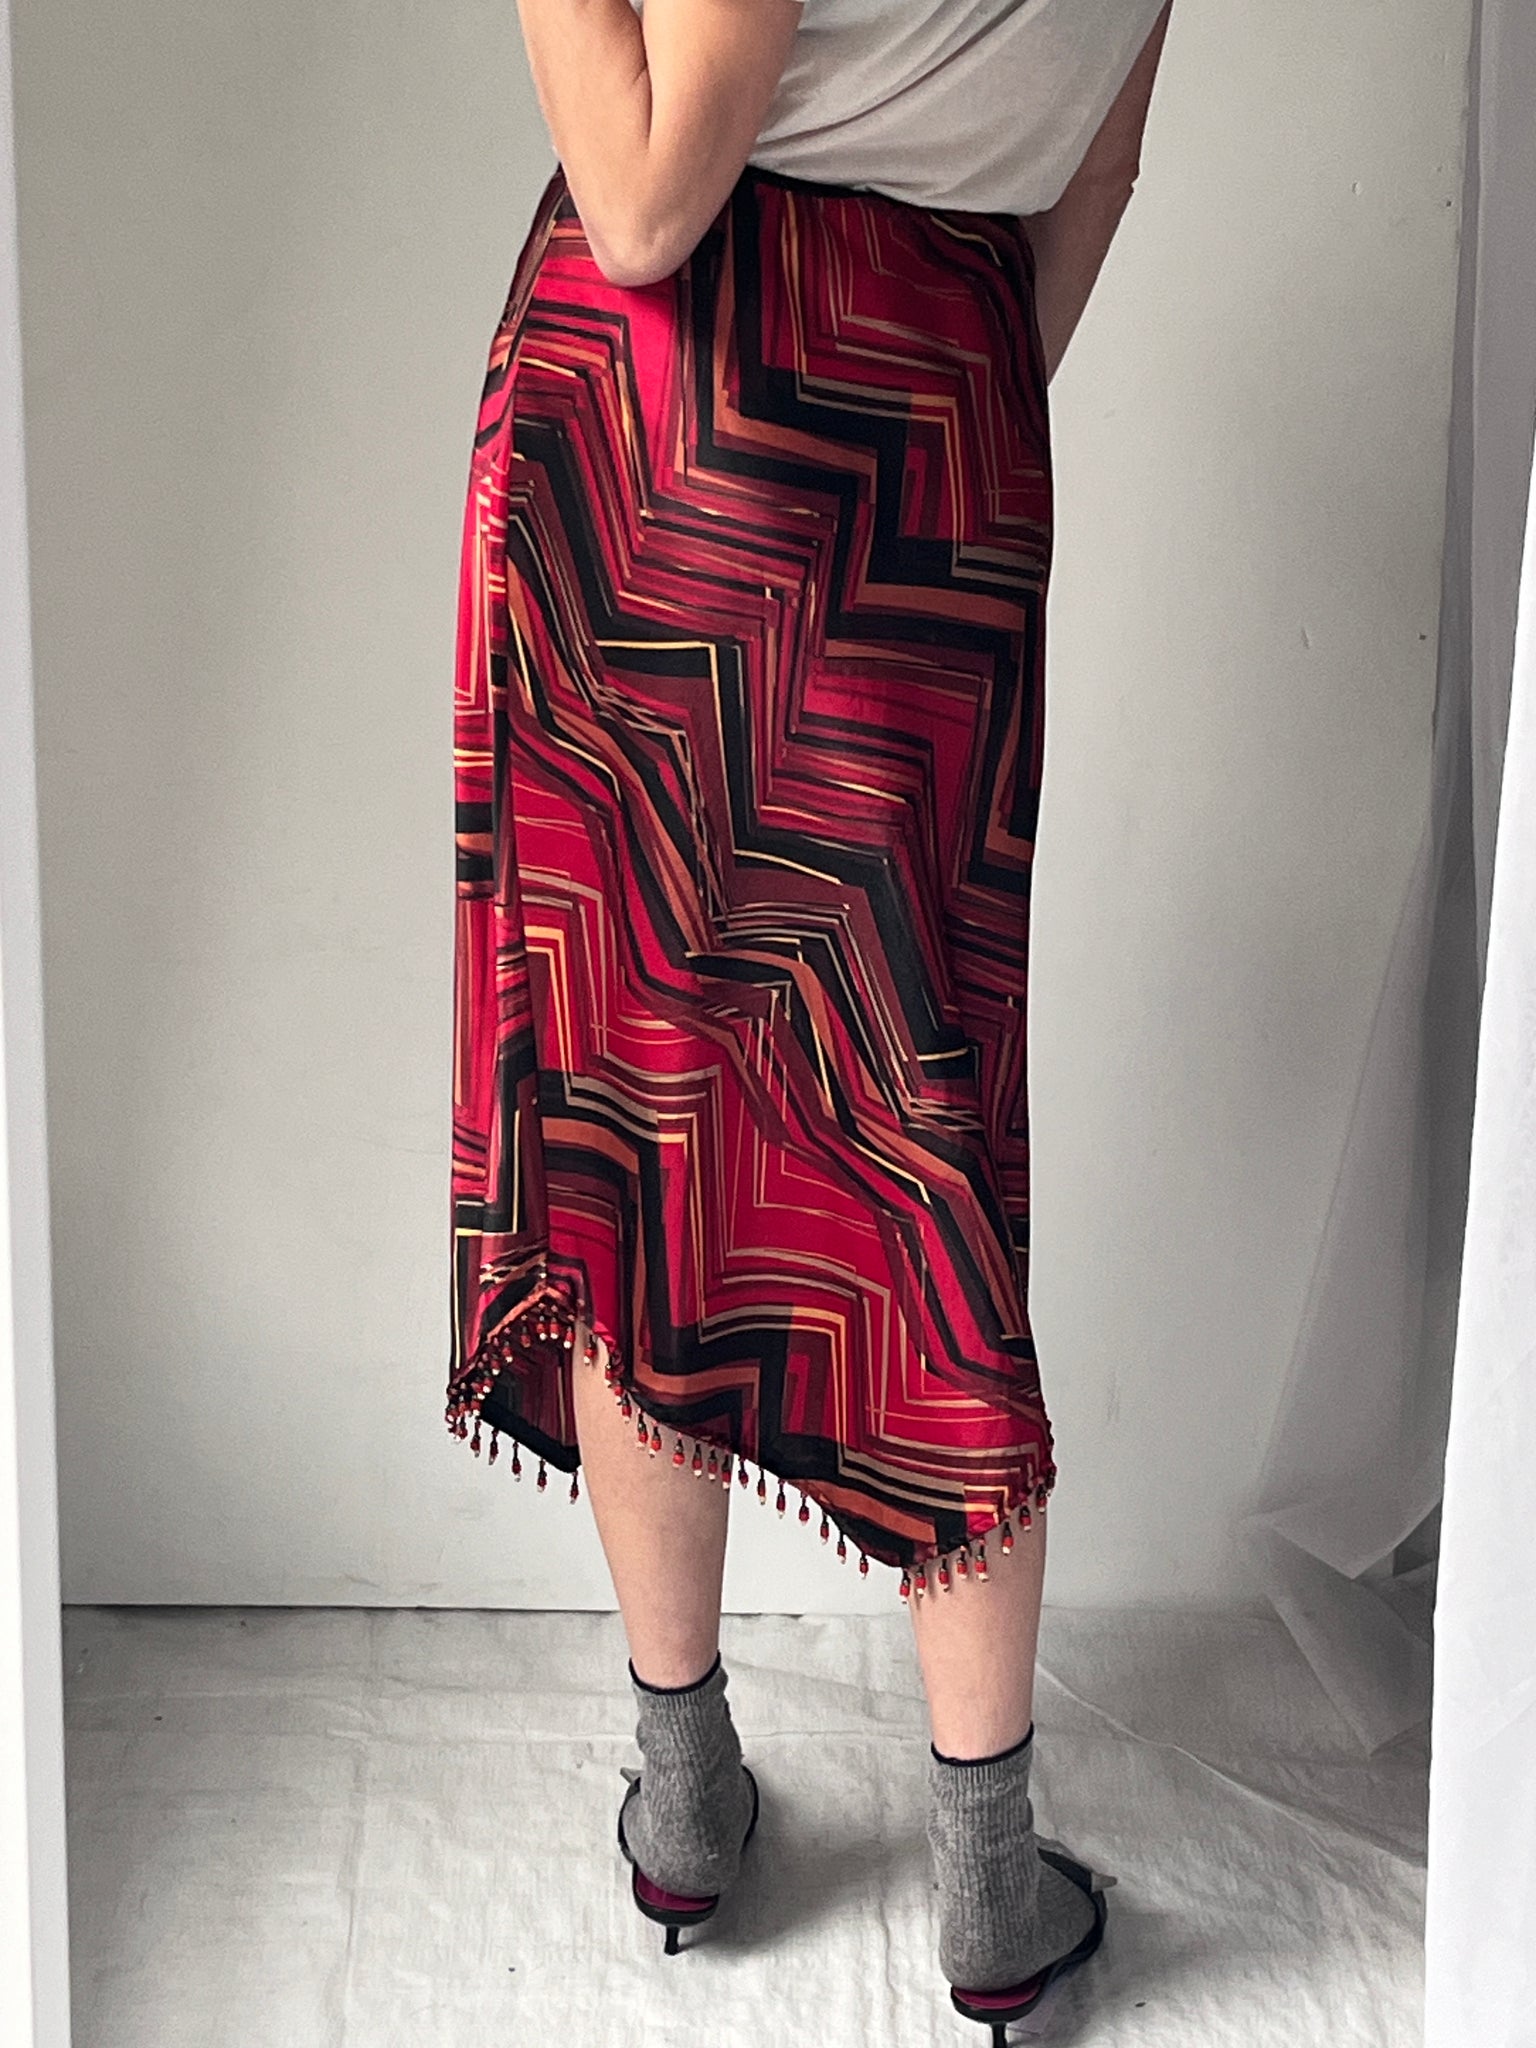 Red & Black Geometric Skirt with Beads